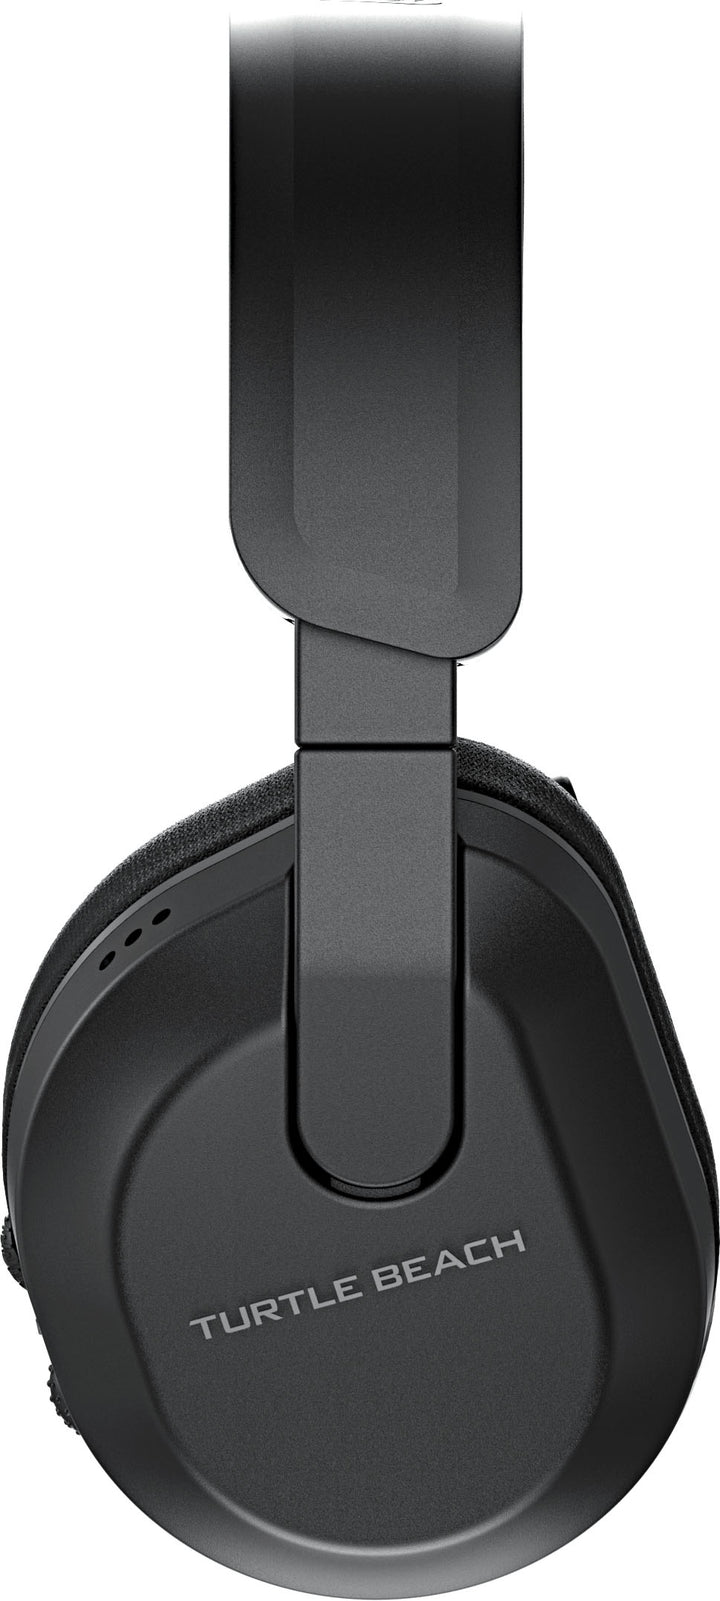 Turtle Beach Stealth 600 Wireless Gaming Headset for Xbox Series X|S, PC, PS5, PS4, Nintendo Switch with 80-Hr Battery - Black_4